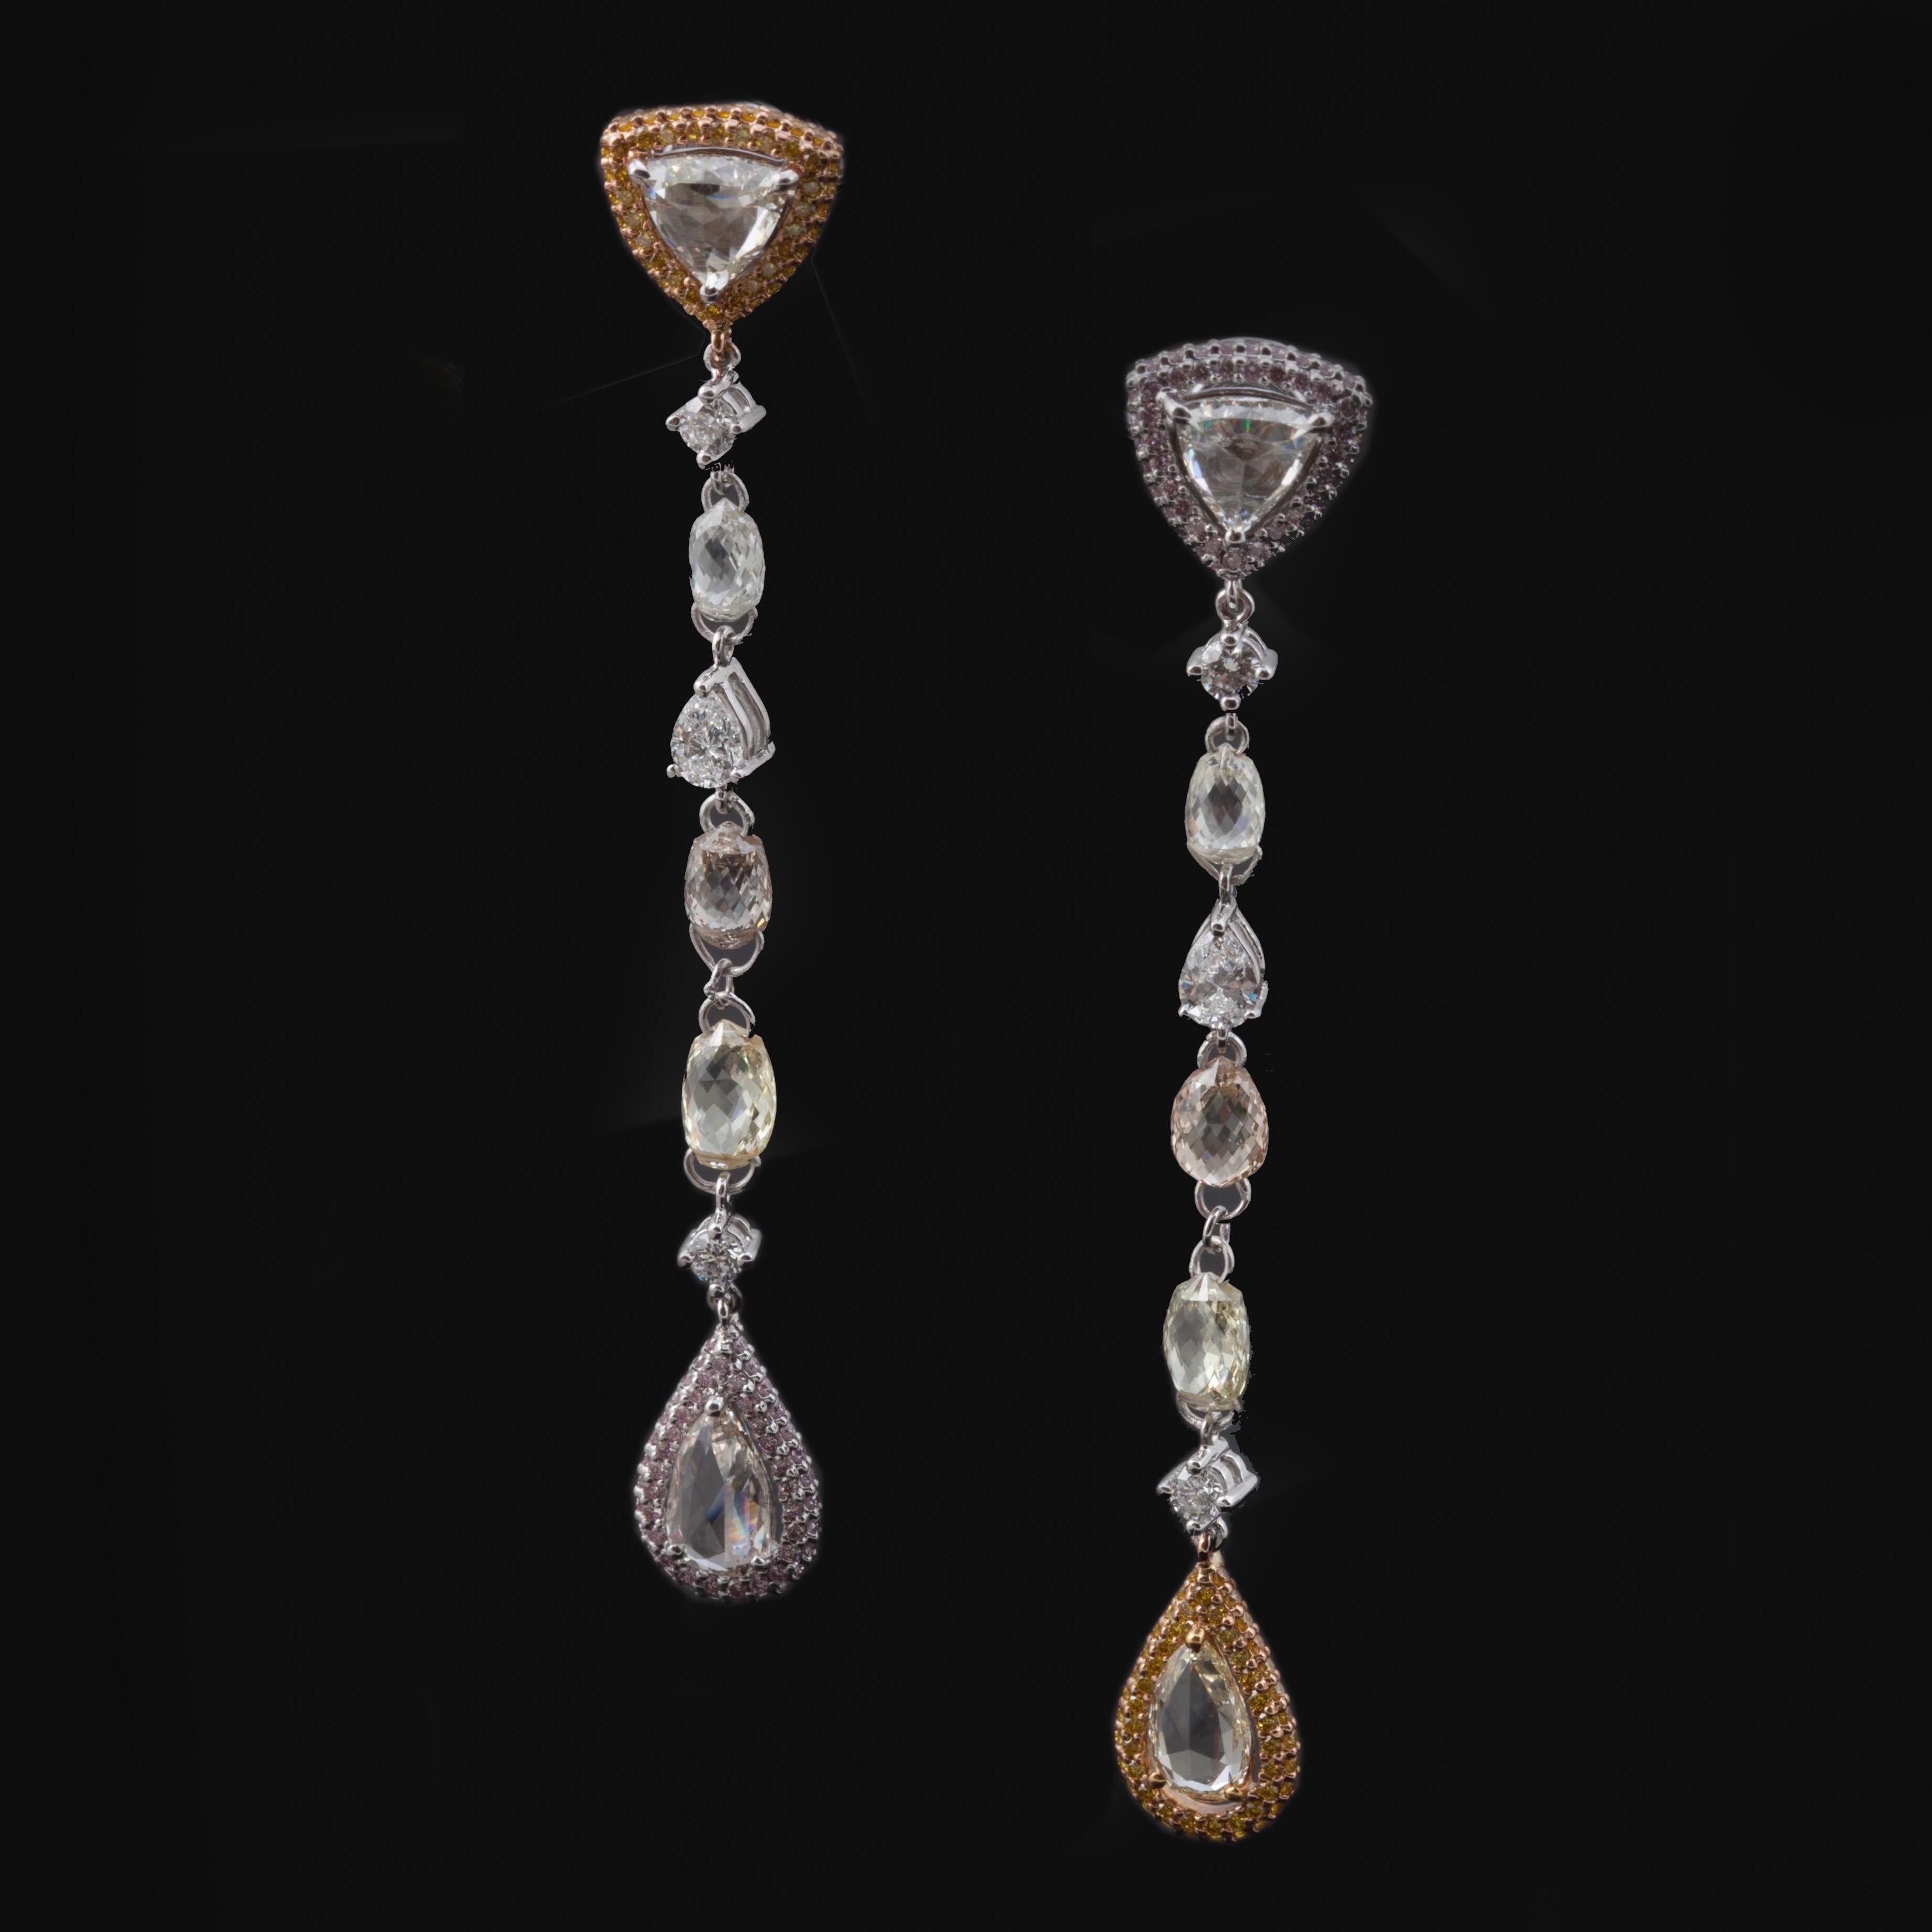 These spectacular earrings are inspired by a play on words derived from a natural phenomenon. Big Rock Candy Mountain is as much an inspiration as the rock formation of yellows, oranges, reds, and whites that inspire these earrings and lent this